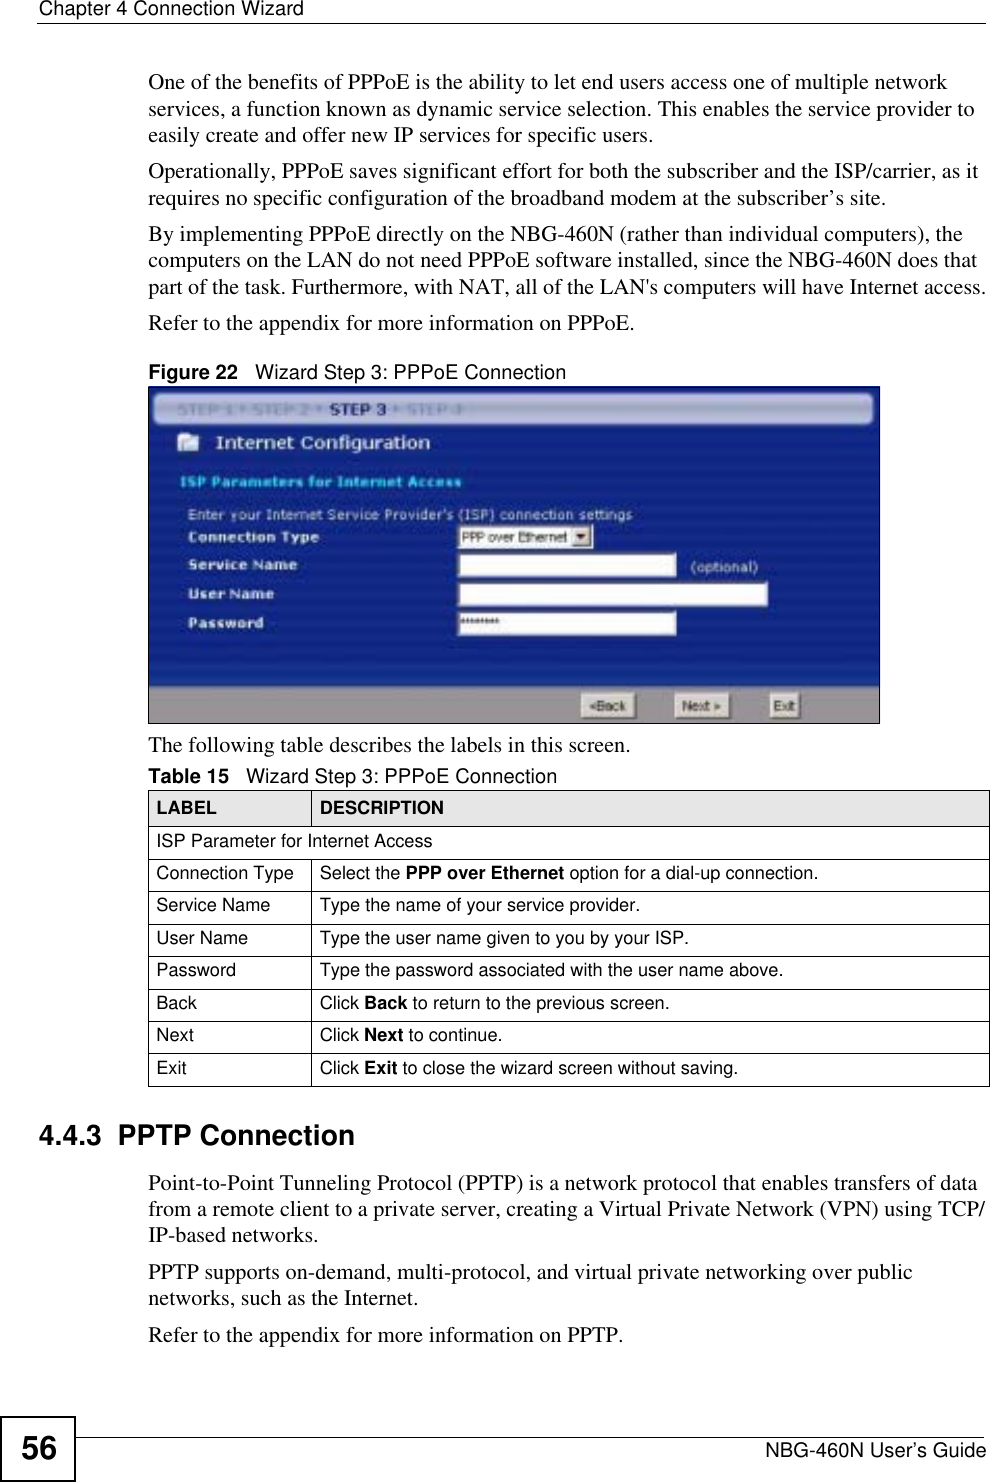 Chapter 4 Connection WizardNBG-460N User’s Guide56One of the benefits of PPPoE is the ability to let end users access one of multiple network services, a function known as dynamic service selection. This enables the service provider to easily create and offer new IP services for specific users.Operationally, PPPoE saves significant effort for both the subscriber and the ISP/carrier, as it requires no specific configuration of the broadband modem at the subscriber’s site.By implementing PPPoE directly on the NBG-460N (rather than individual computers), the computers on the LAN do not need PPPoE software installed, since the NBG-460N does that part of the task. Furthermore, with NAT, all of the LAN&apos;s computers will have Internet access.Refer to the appendix for more information on PPPoE.Figure 22   Wizard Step 3: PPPoE ConnectionThe following table describes the labels in this screen.4.4.3  PPTP ConnectionPoint-to-Point Tunneling Protocol (PPTP) is a network protocol that enables transfers of data from a remote client to a private server, creating a Virtual Private Network (VPN) using TCP/IP-based networks.PPTP supports on-demand, multi-protocol, and virtual private networking over public networks, such as the Internet.Refer to the appendix for more information on PPTP.Table 15   Wizard Step 3: PPPoE ConnectionLABEL DESCRIPTIONISP Parameter for Internet AccessConnection Type Select the PPP over Ethernet option for a dial-up connection.Service Name  Type the name of your service provider.User Name Type the user name given to you by your ISP. Password  Type the password associated with the user name above.Back Click Back to return to the previous screen. Next Click Next to continue. Exit Click Exit to close the wizard screen without saving.